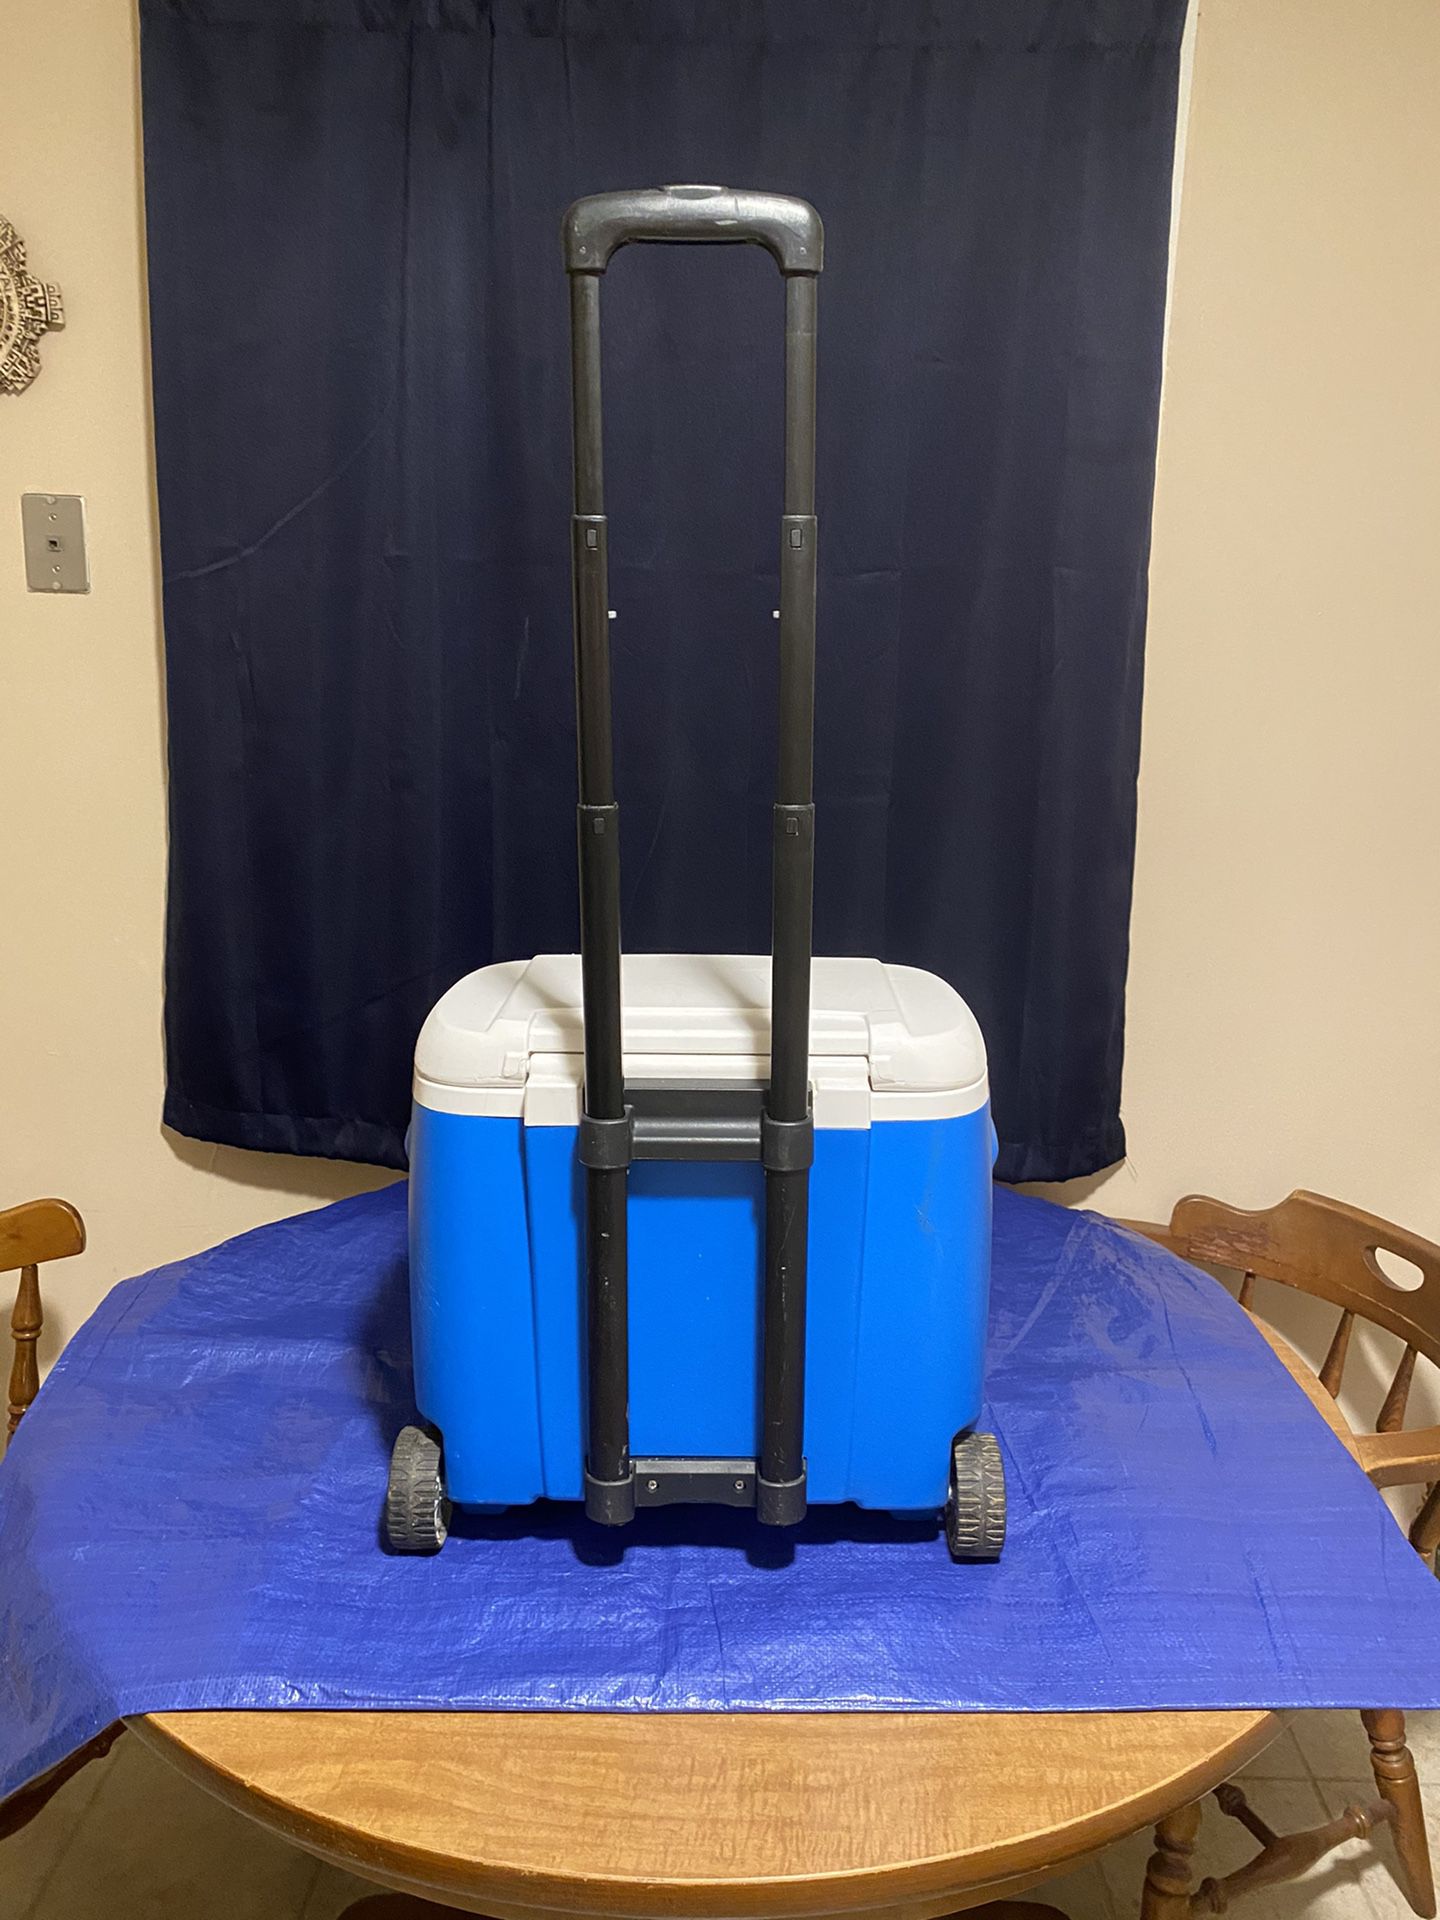 Igloo cooler with wheels and extension handle